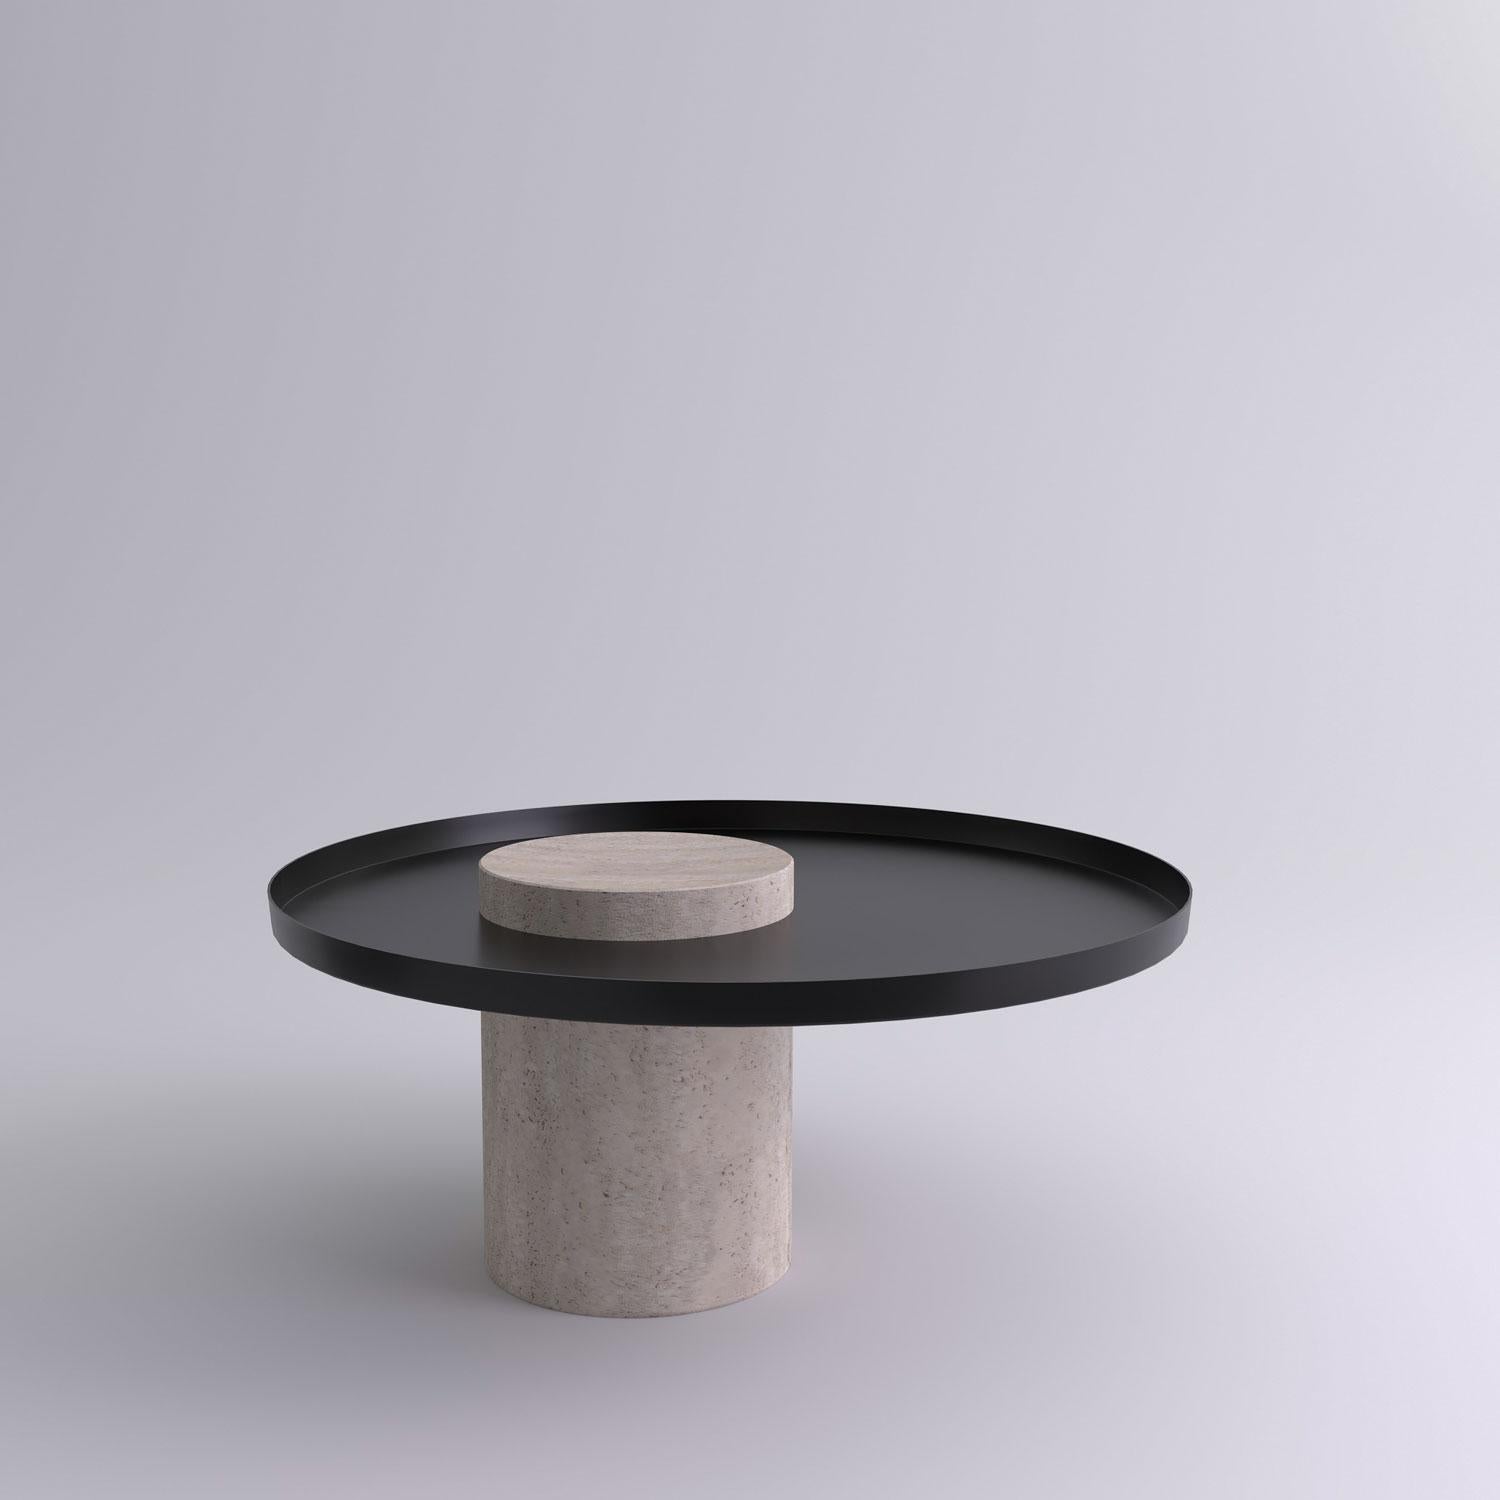 Low travertine contemporary guéridon, Sebastian Herkner
Dimensions: D 70 x H 33 cm
Materials: Travertine stone, black metal tray

The salute table exists in 3 sizes, 4 different marble stones for the column and 5 different finishes for the tray